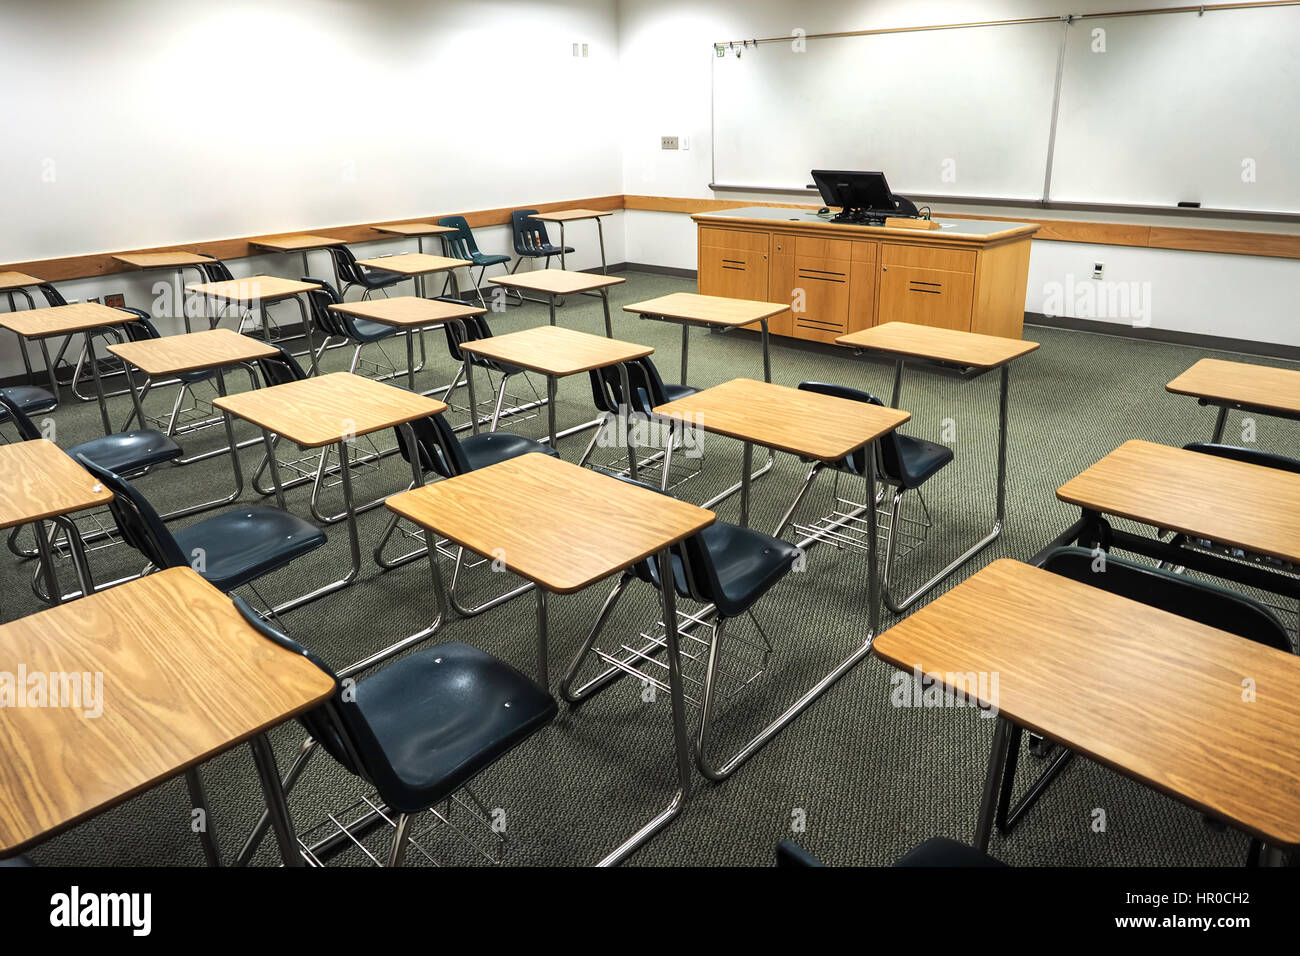 Empty classroom with student seating or desks. Stock Photo